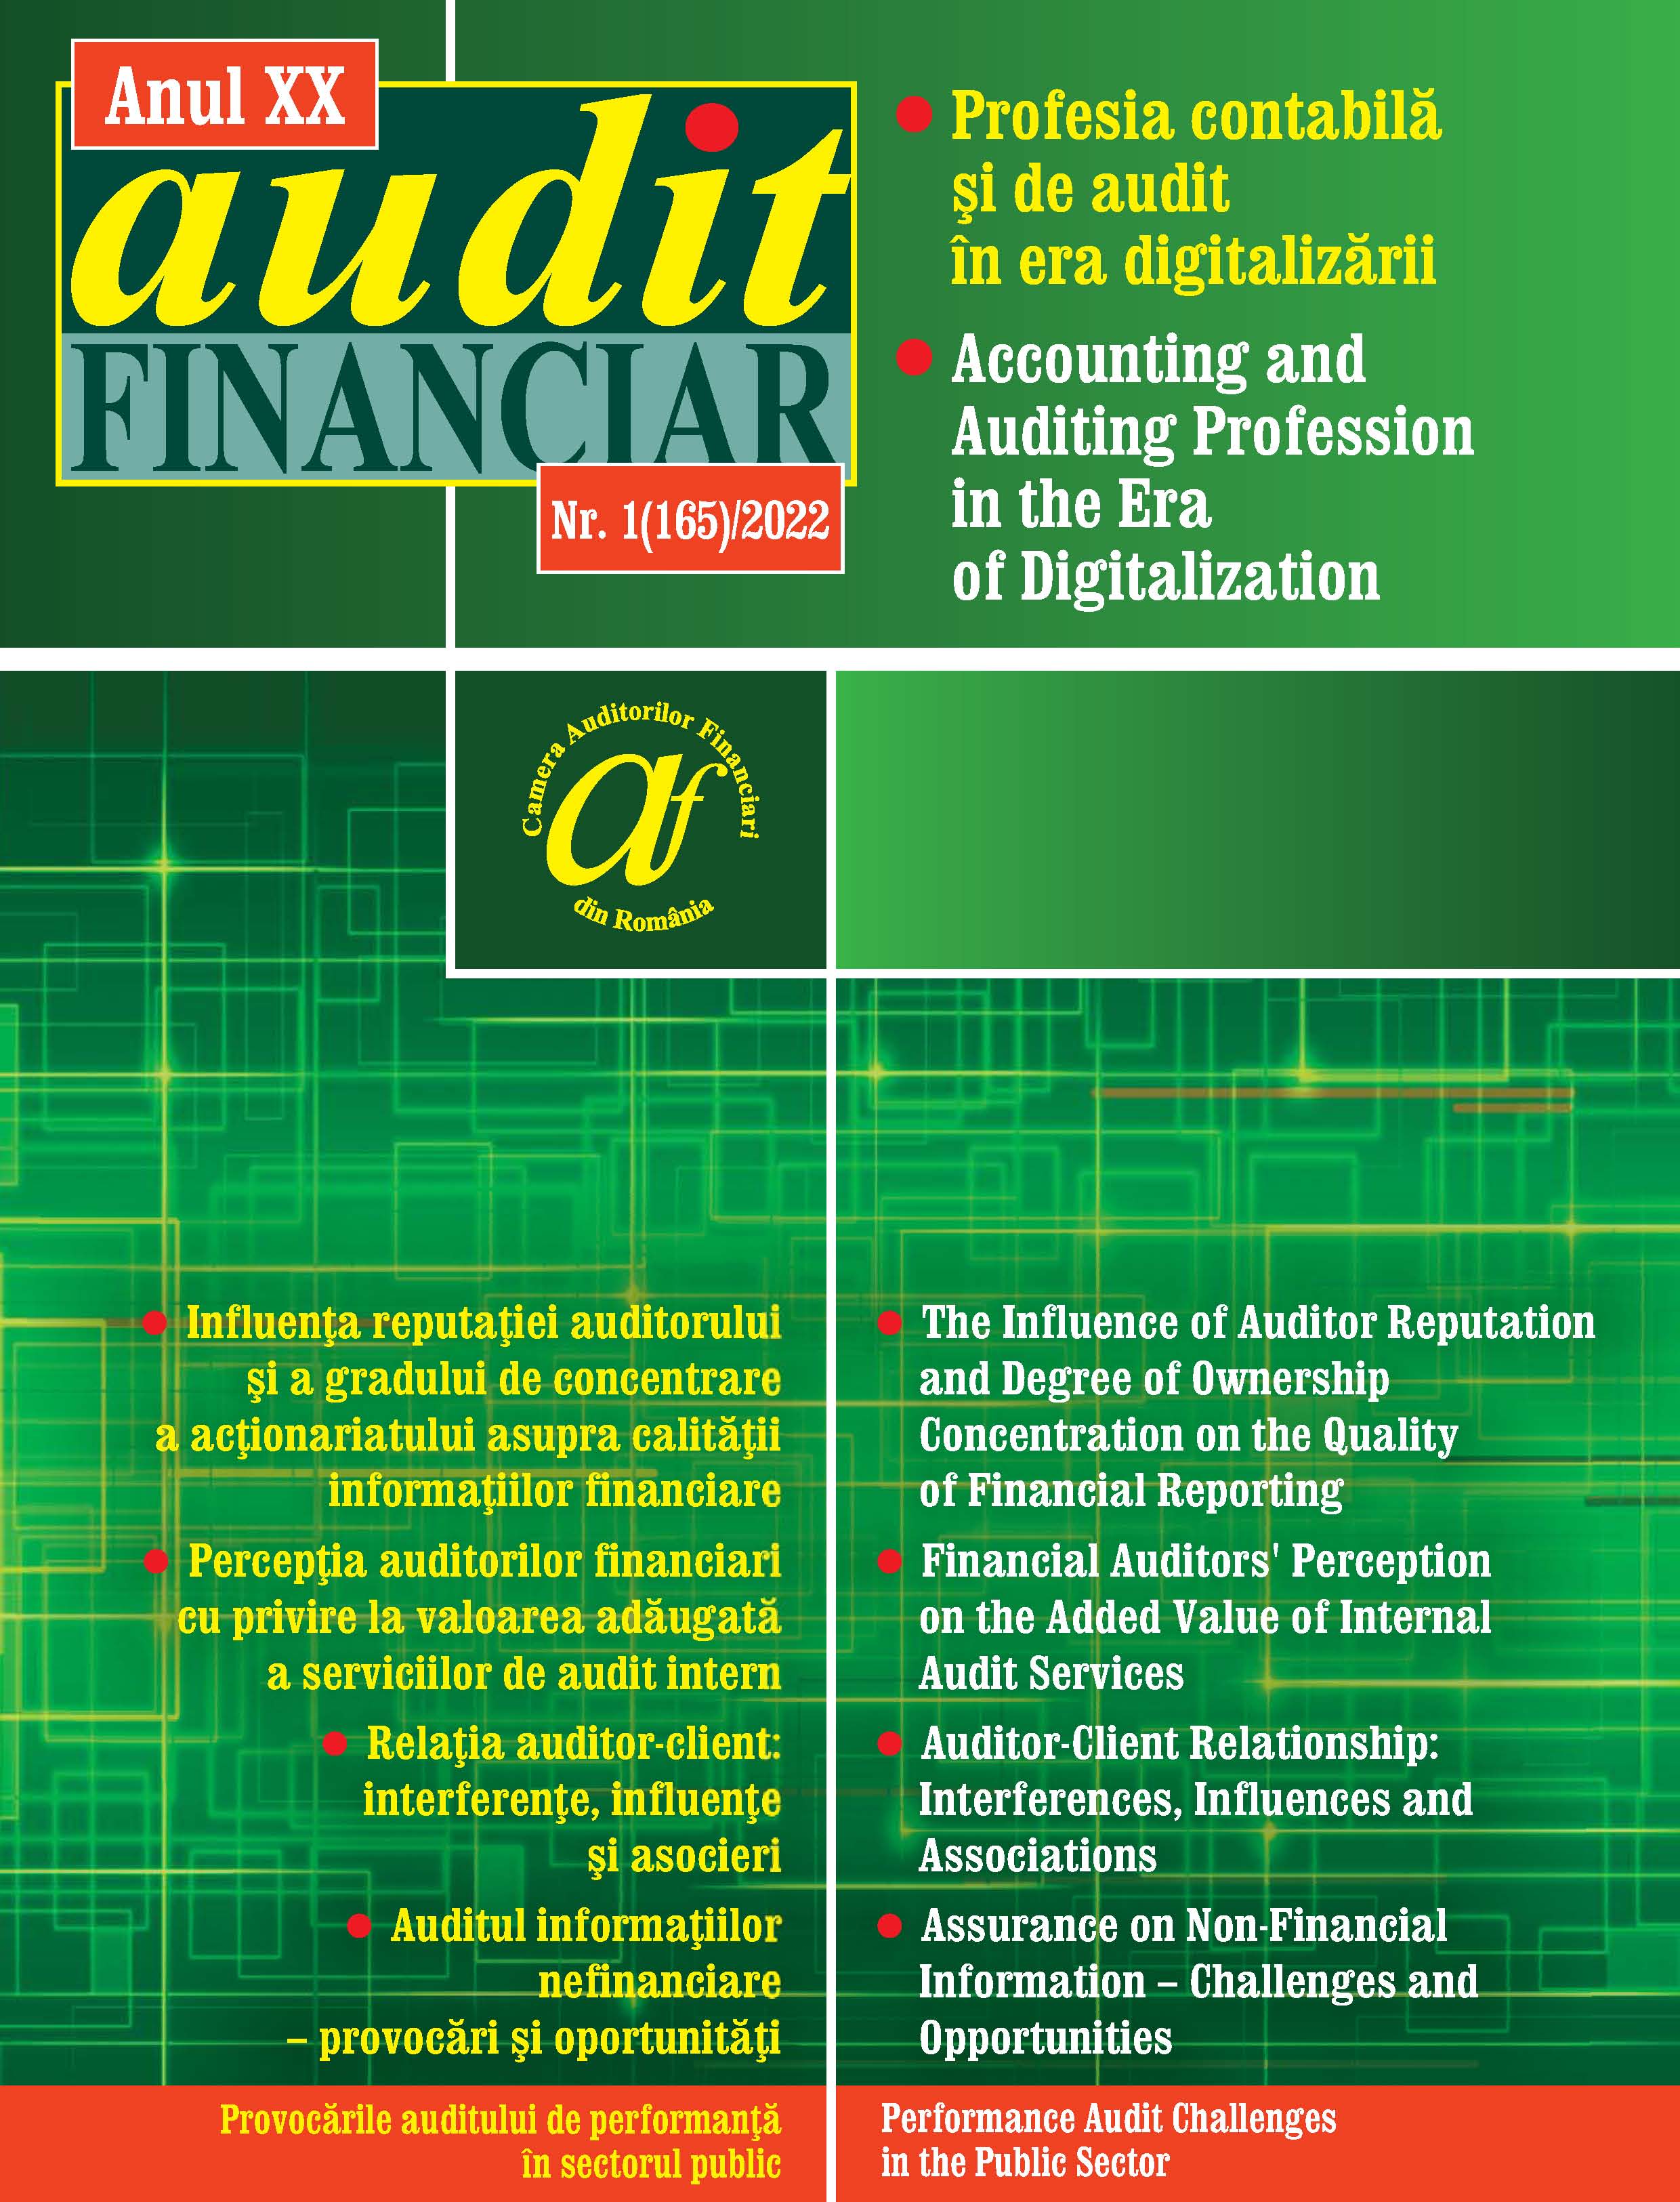 Financial Auditors’ Perception on the Added Value of Internal Audit Services Cover Image